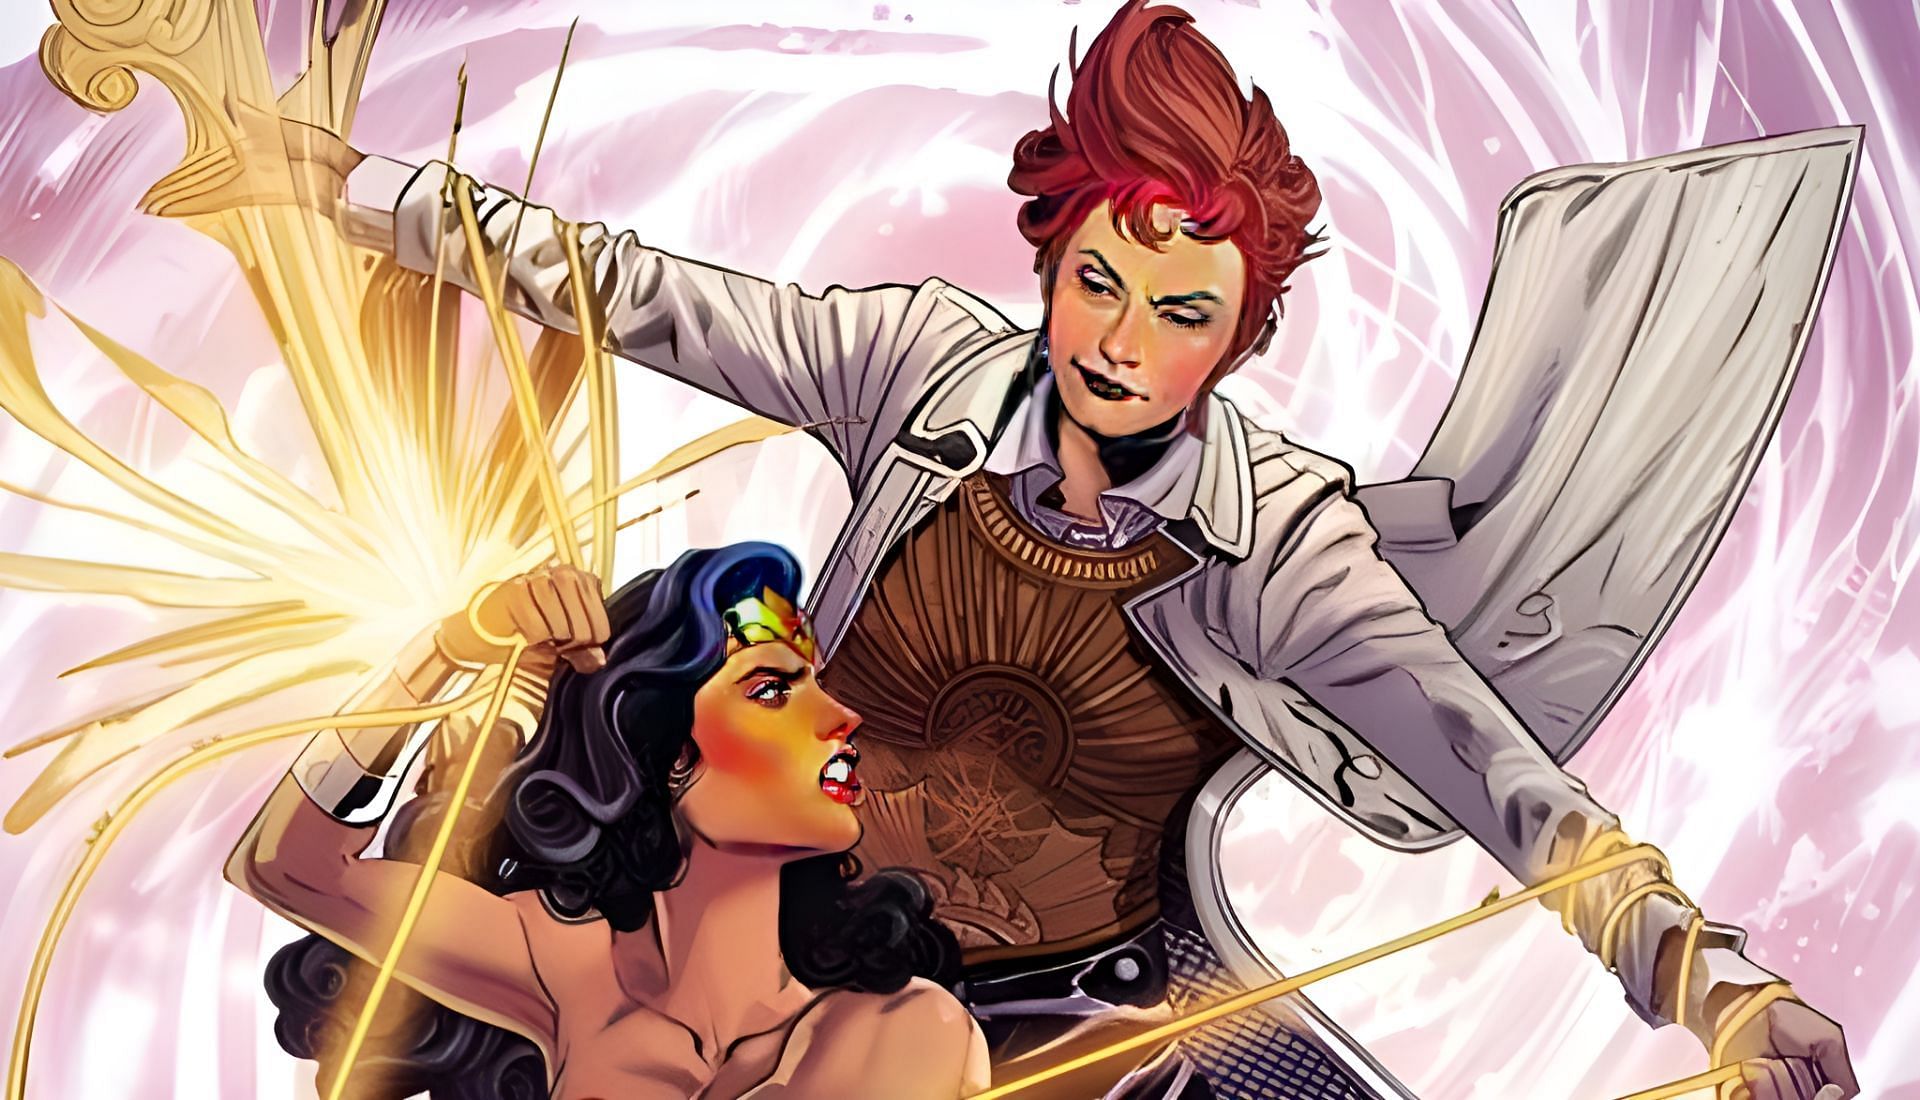 Circe is undoubtedly one of the best Wonder Woman villains. (Image via DC)